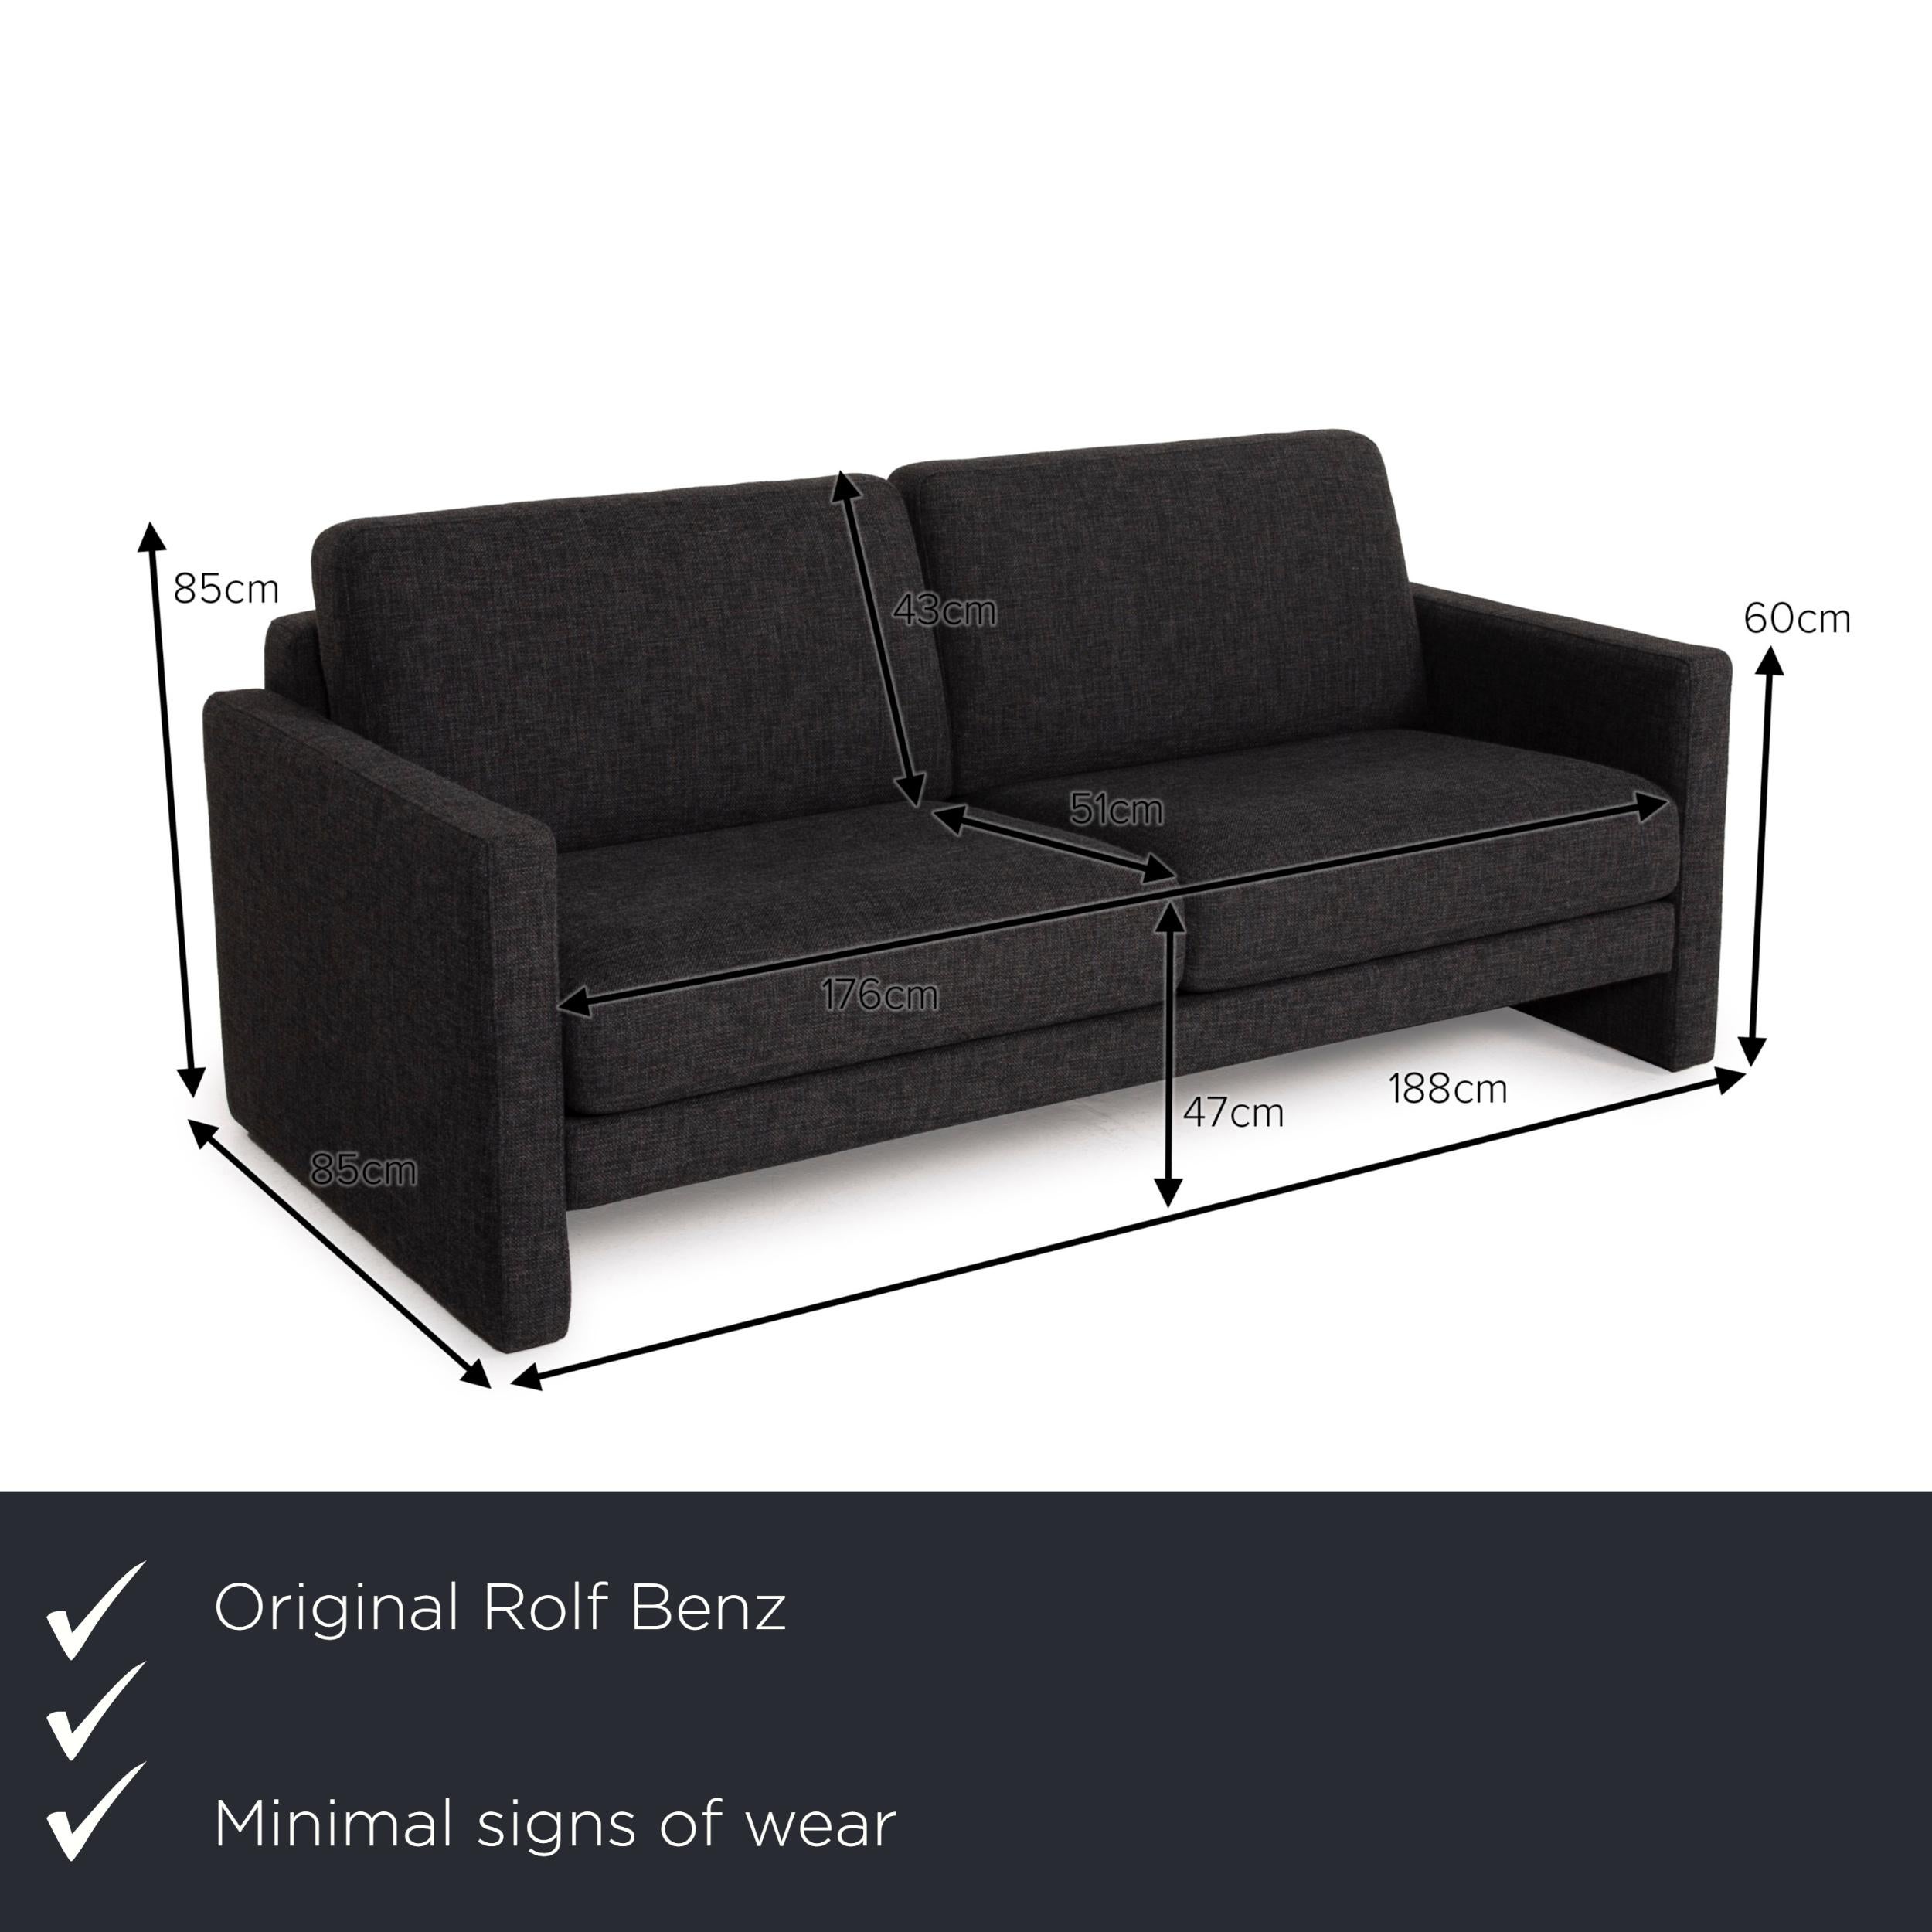 We present to you a Rolf Benz two-seater sofa fabric gray anthracite.


 Product measurements in centimeters:
 

Depth: 95
Width: 188
Height: 85
Seat height: 47
Rest height: 60
Seat depth: 51
Seat width: 176
Back height: 43.
 